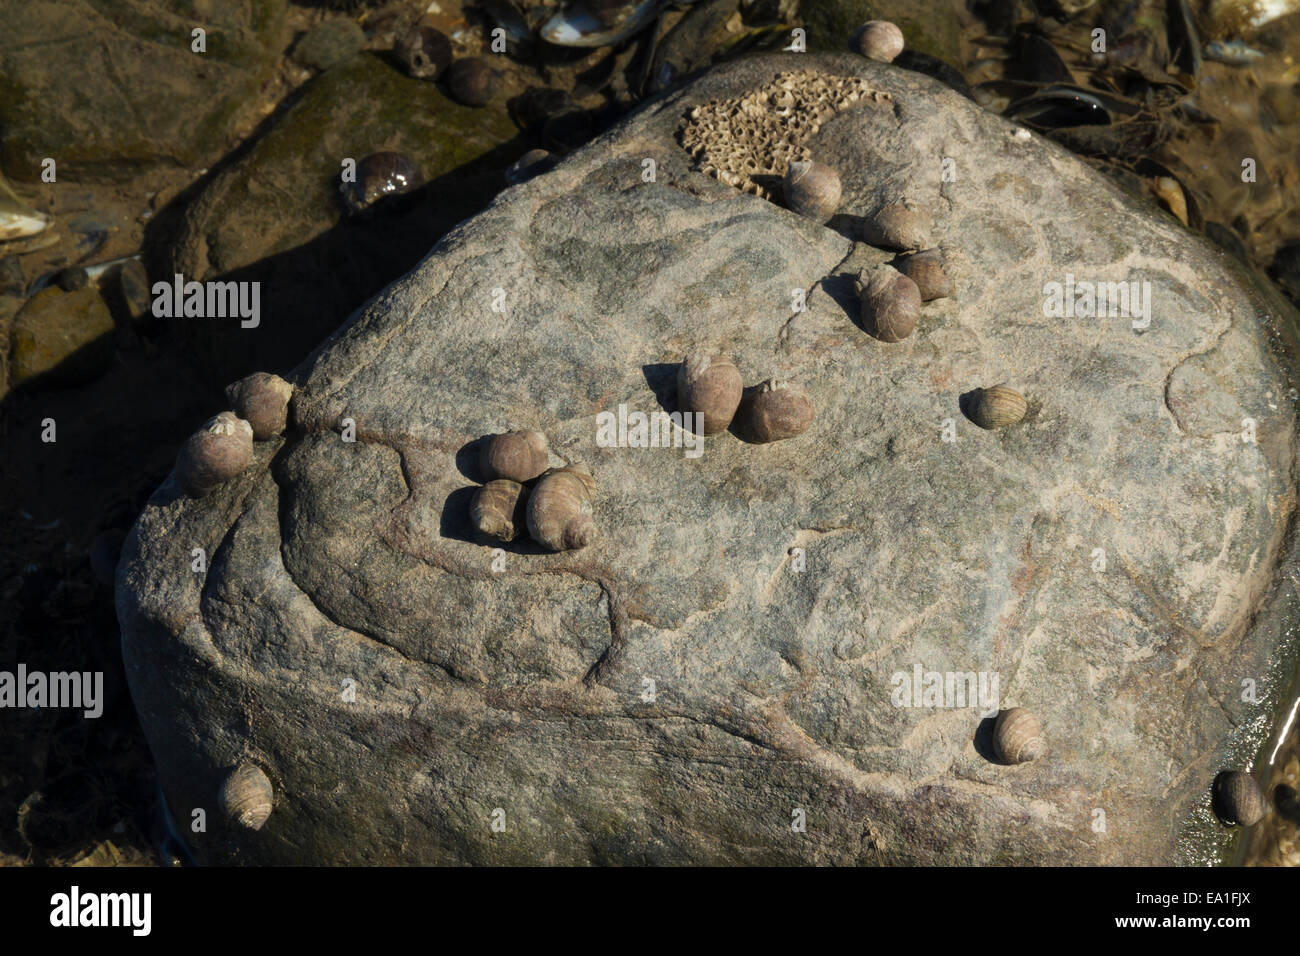 Rough periwinkle or Littorina saxatilis shells clinging to rock at low tide. United Kingdom Stock Photo